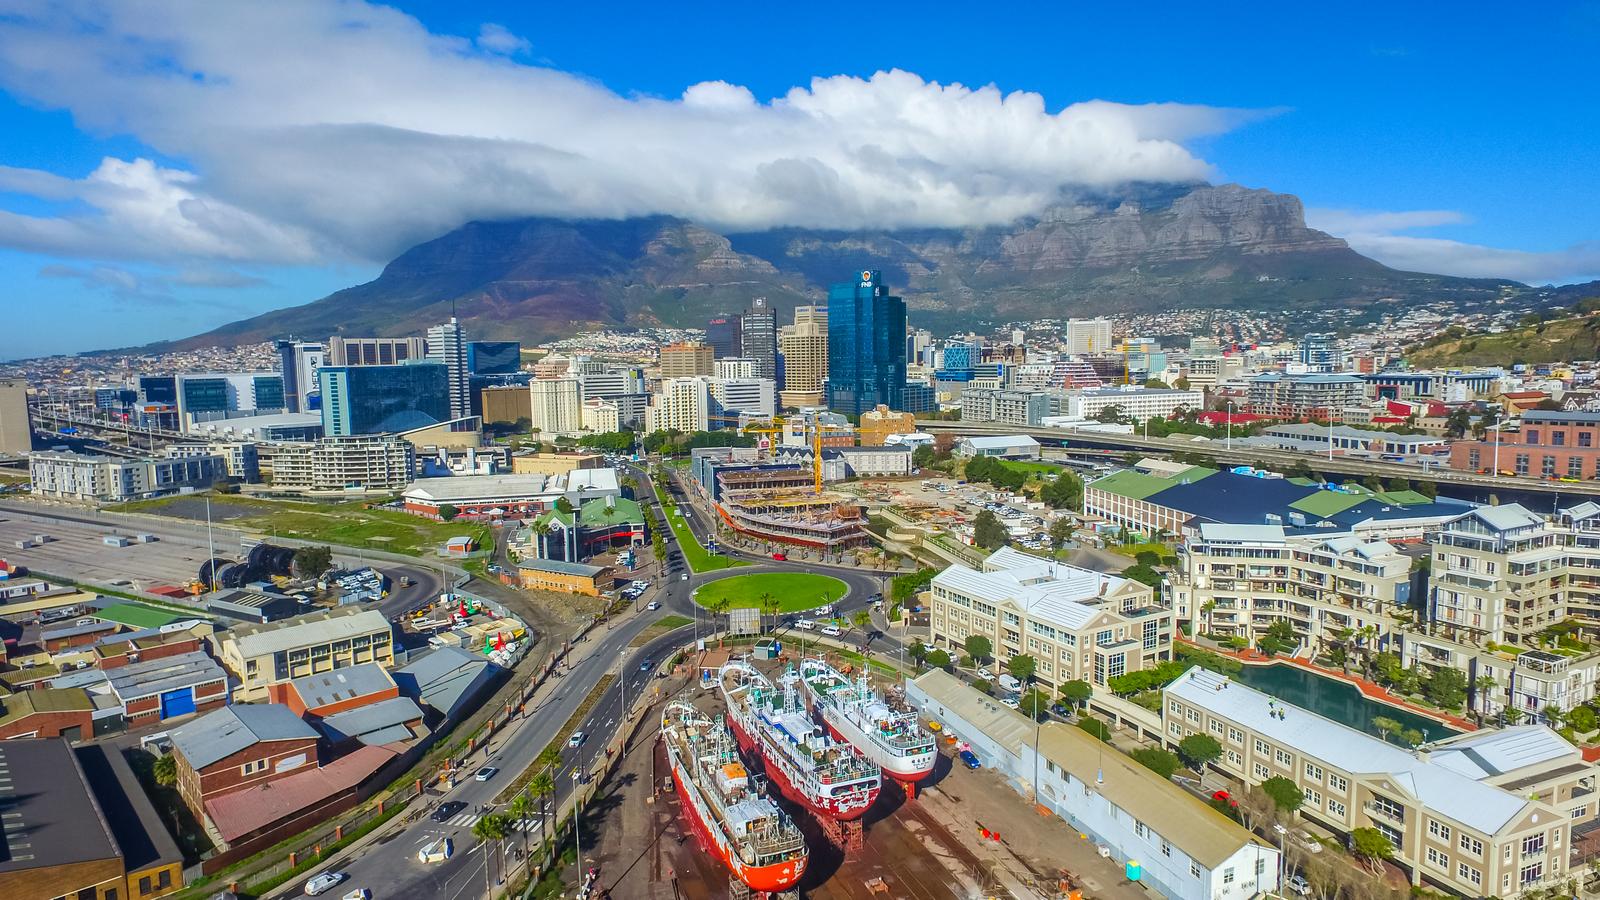 This Travel Quiz Is Scientifically Designed to Determine the Time Period You Belong in Cape Town, South Africa